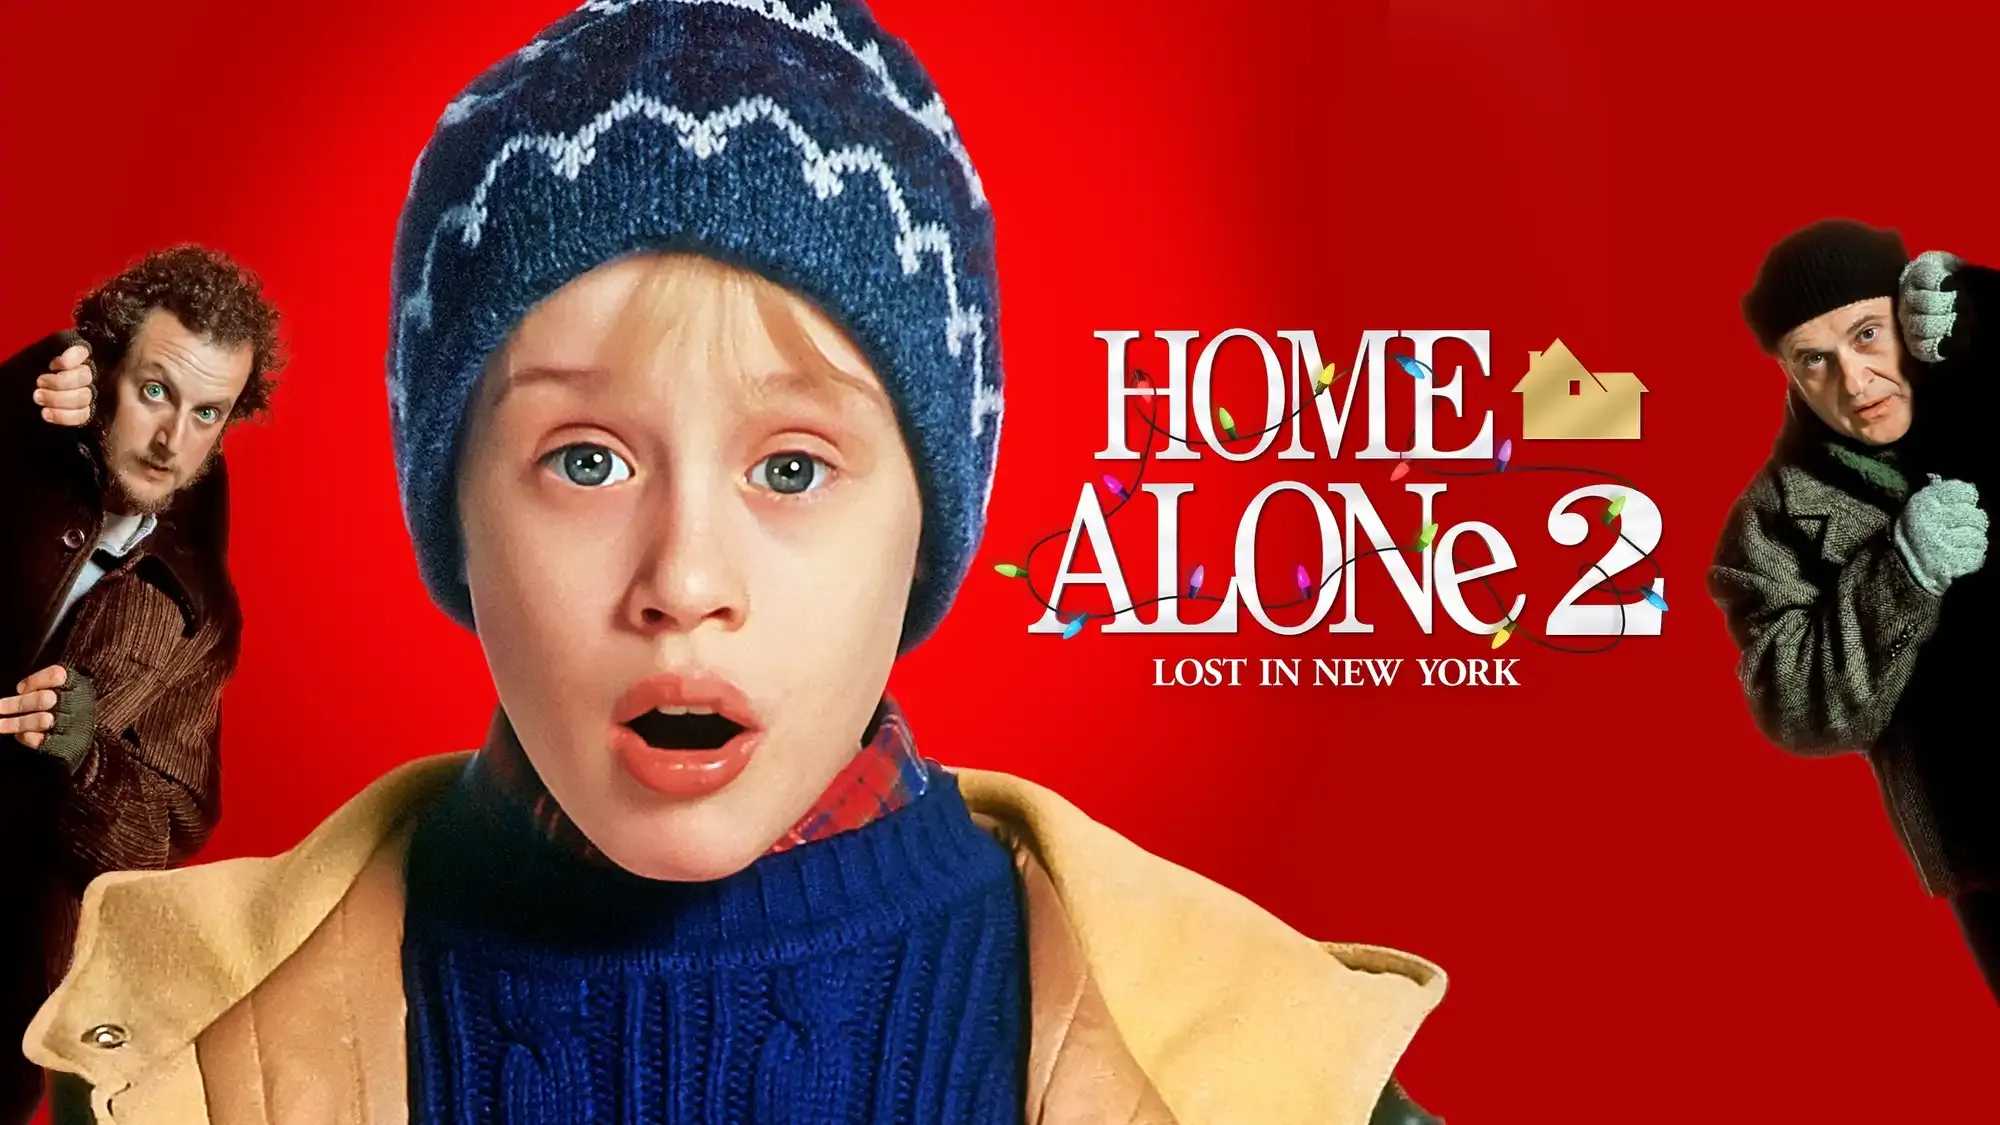 Home Alone 2: Lost in New York movie review